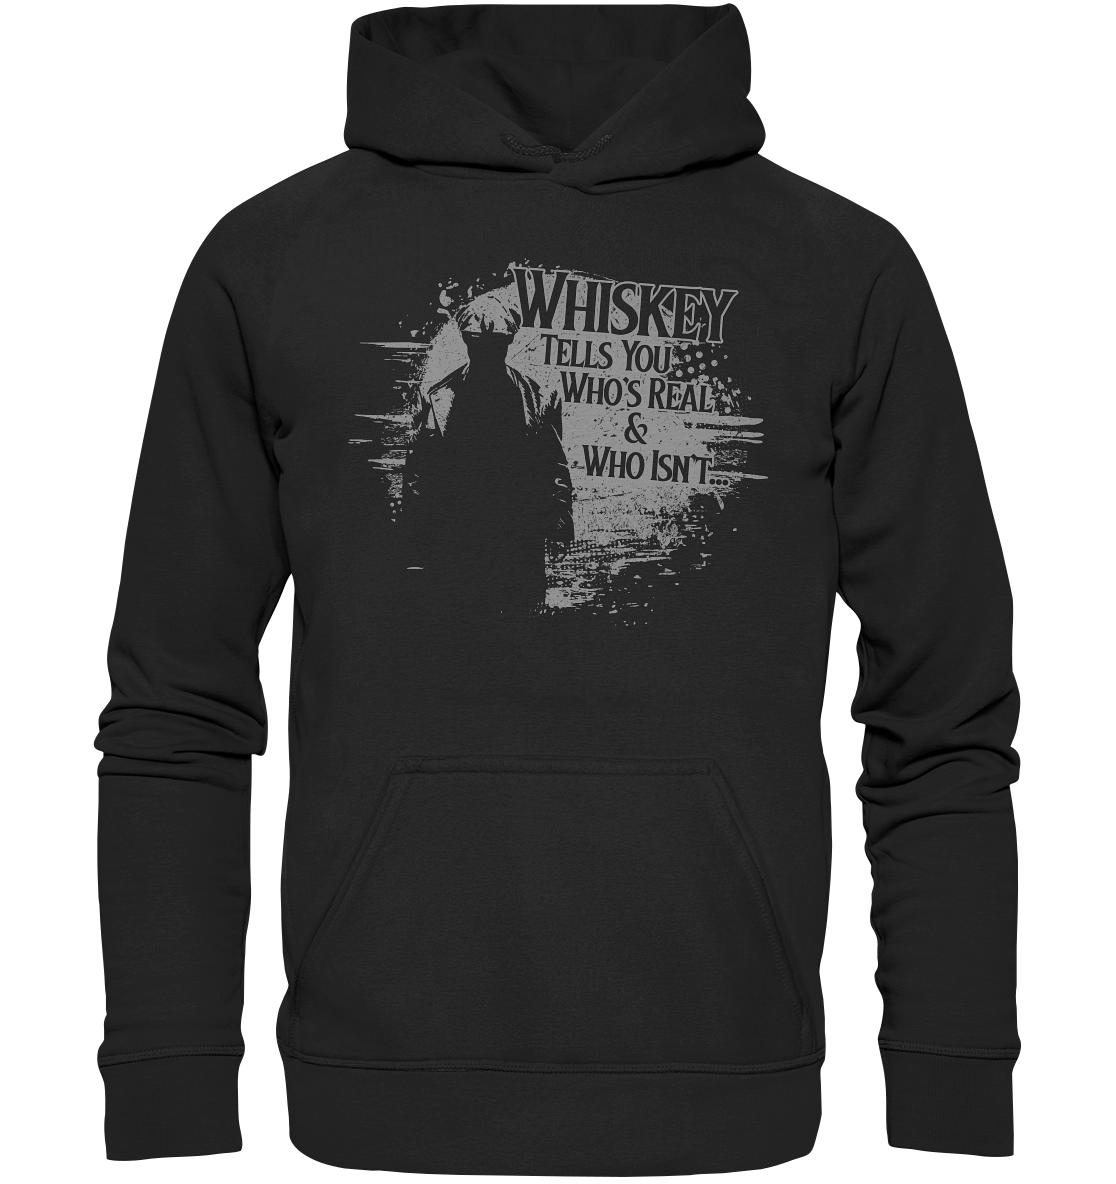 Whiskey Tells You Who's Real & Who Isn't - Basic Unisex Hoodie